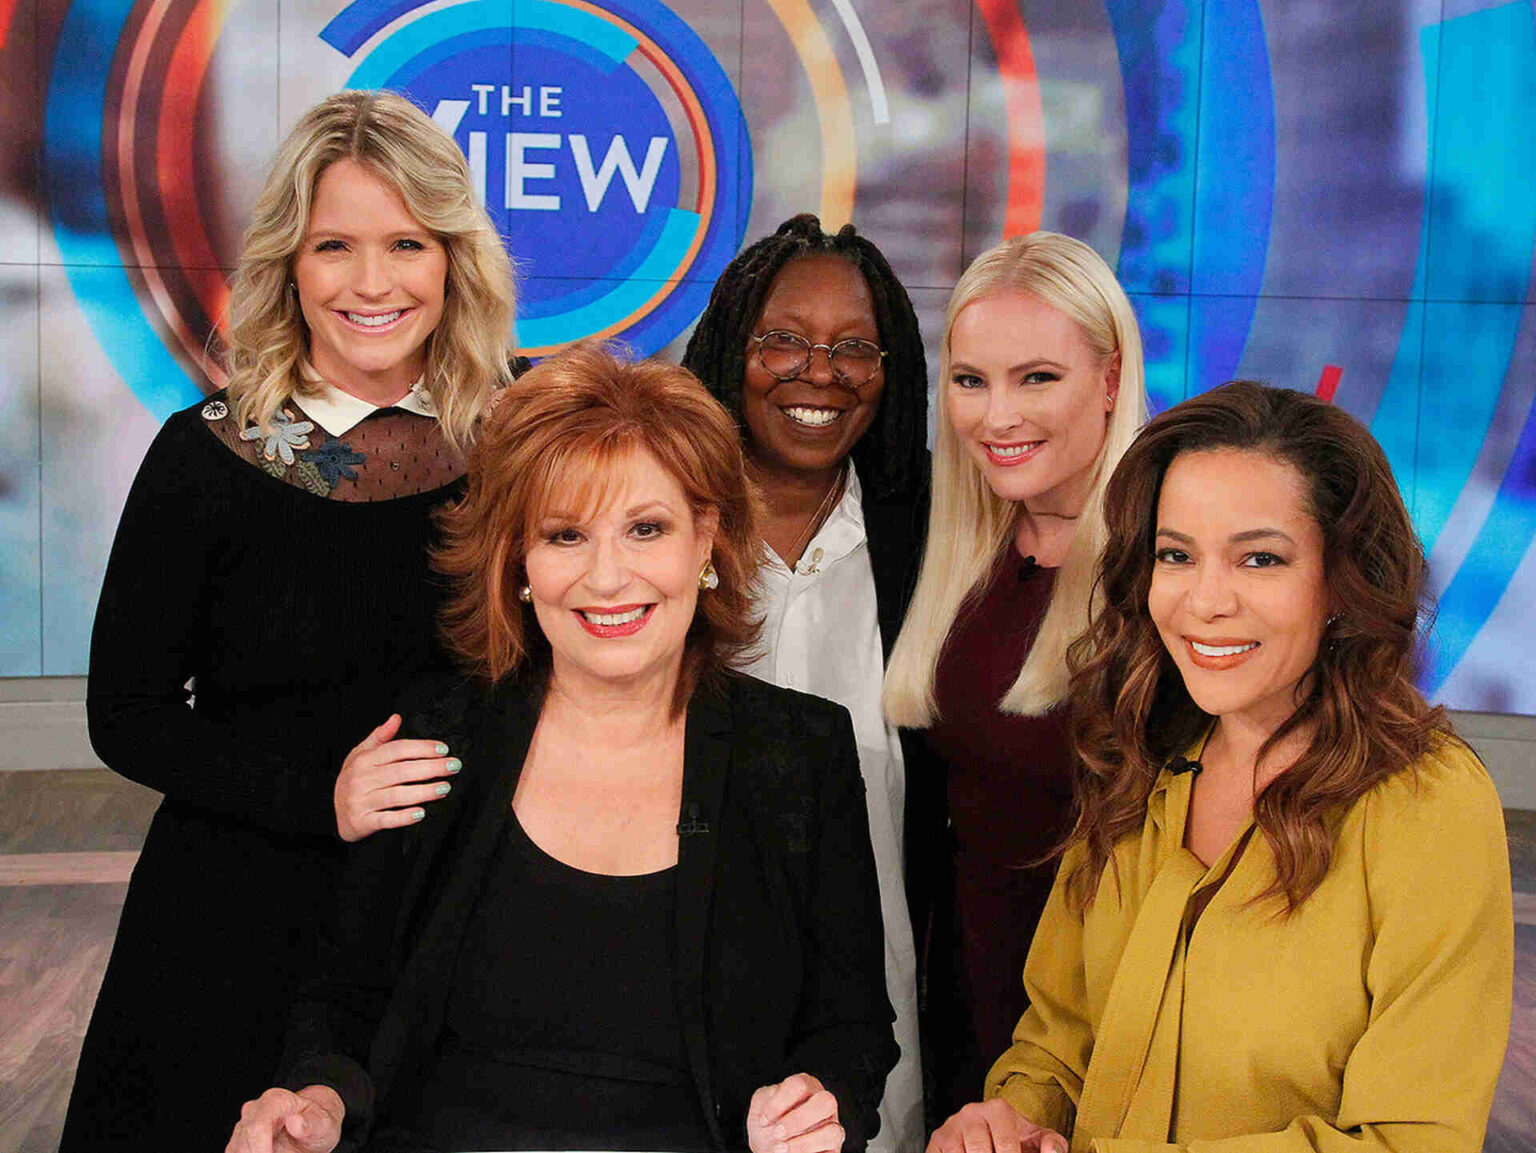 Meghan McCain just made an unexpected announcement that she's leaving 'The View', so is the show going to be cancelled now? Let's take a deeper look here.